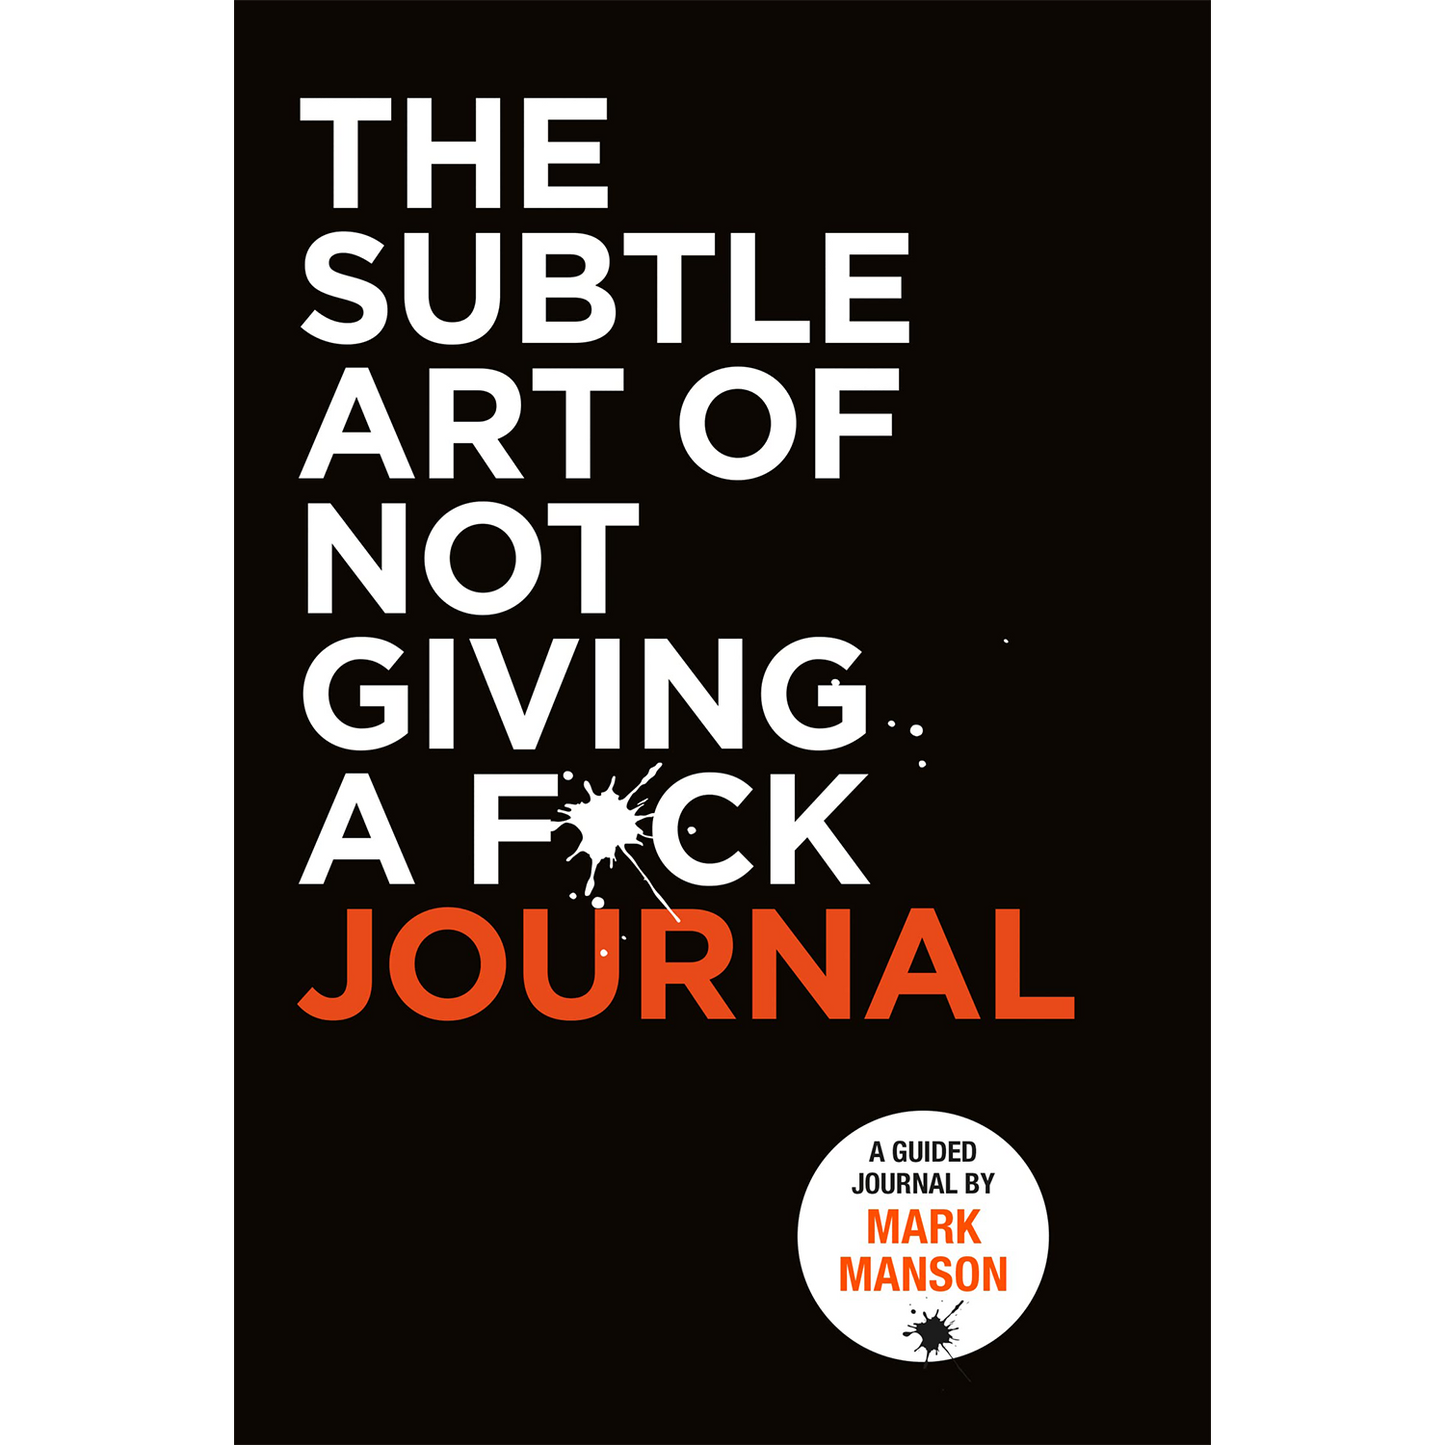 The Subtle Art of not Giving a Fuck Journal